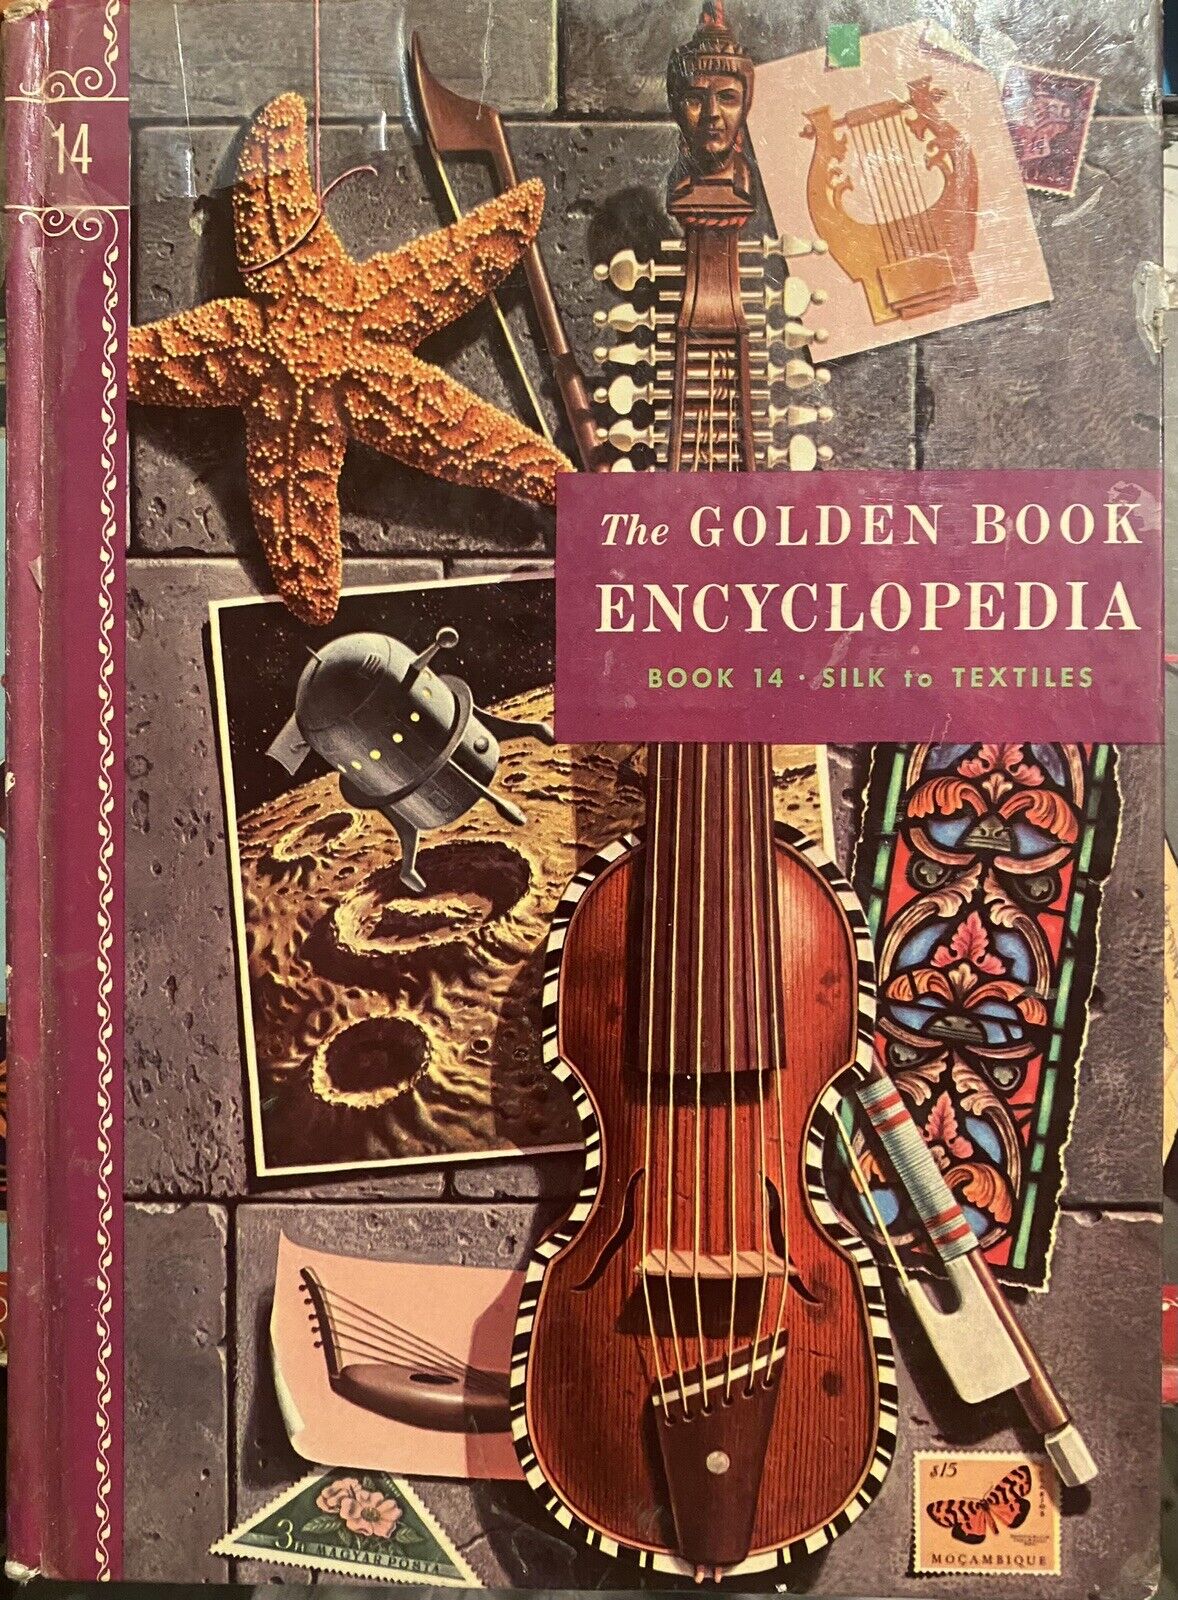 1959 The Golden Book Encyclopedia Book 14 Good Condition One Owner